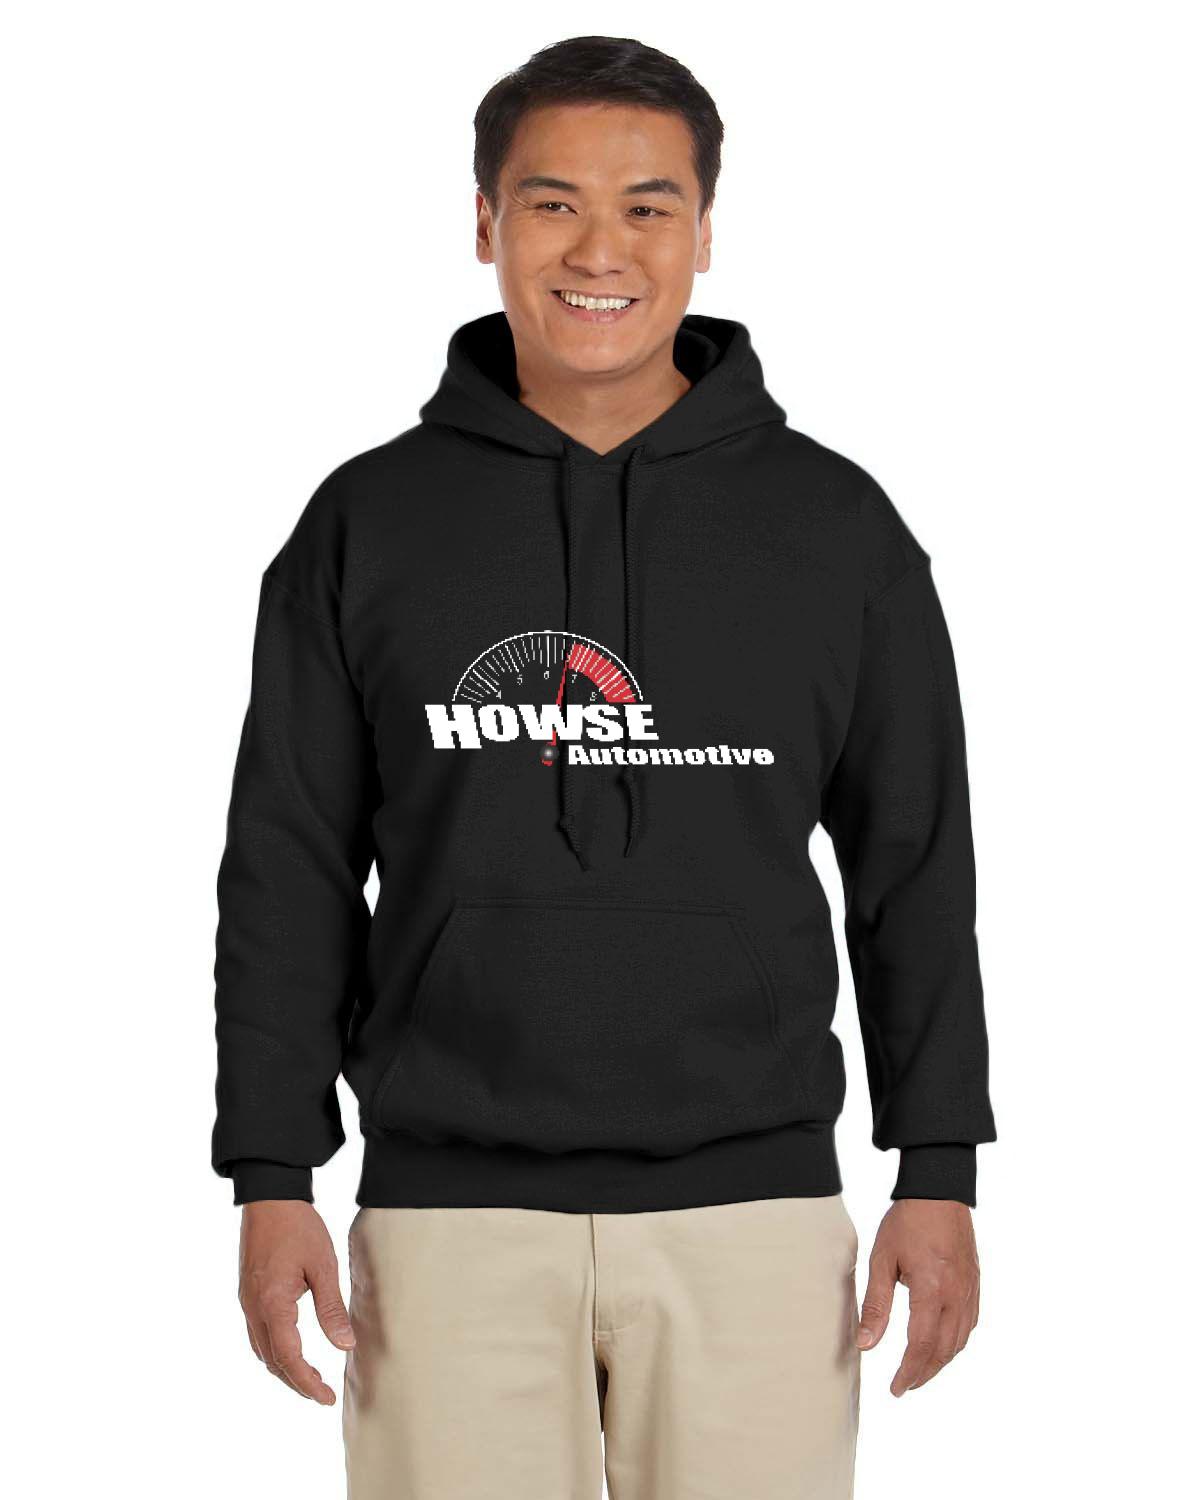 Howse Automotive Adult Hoodie